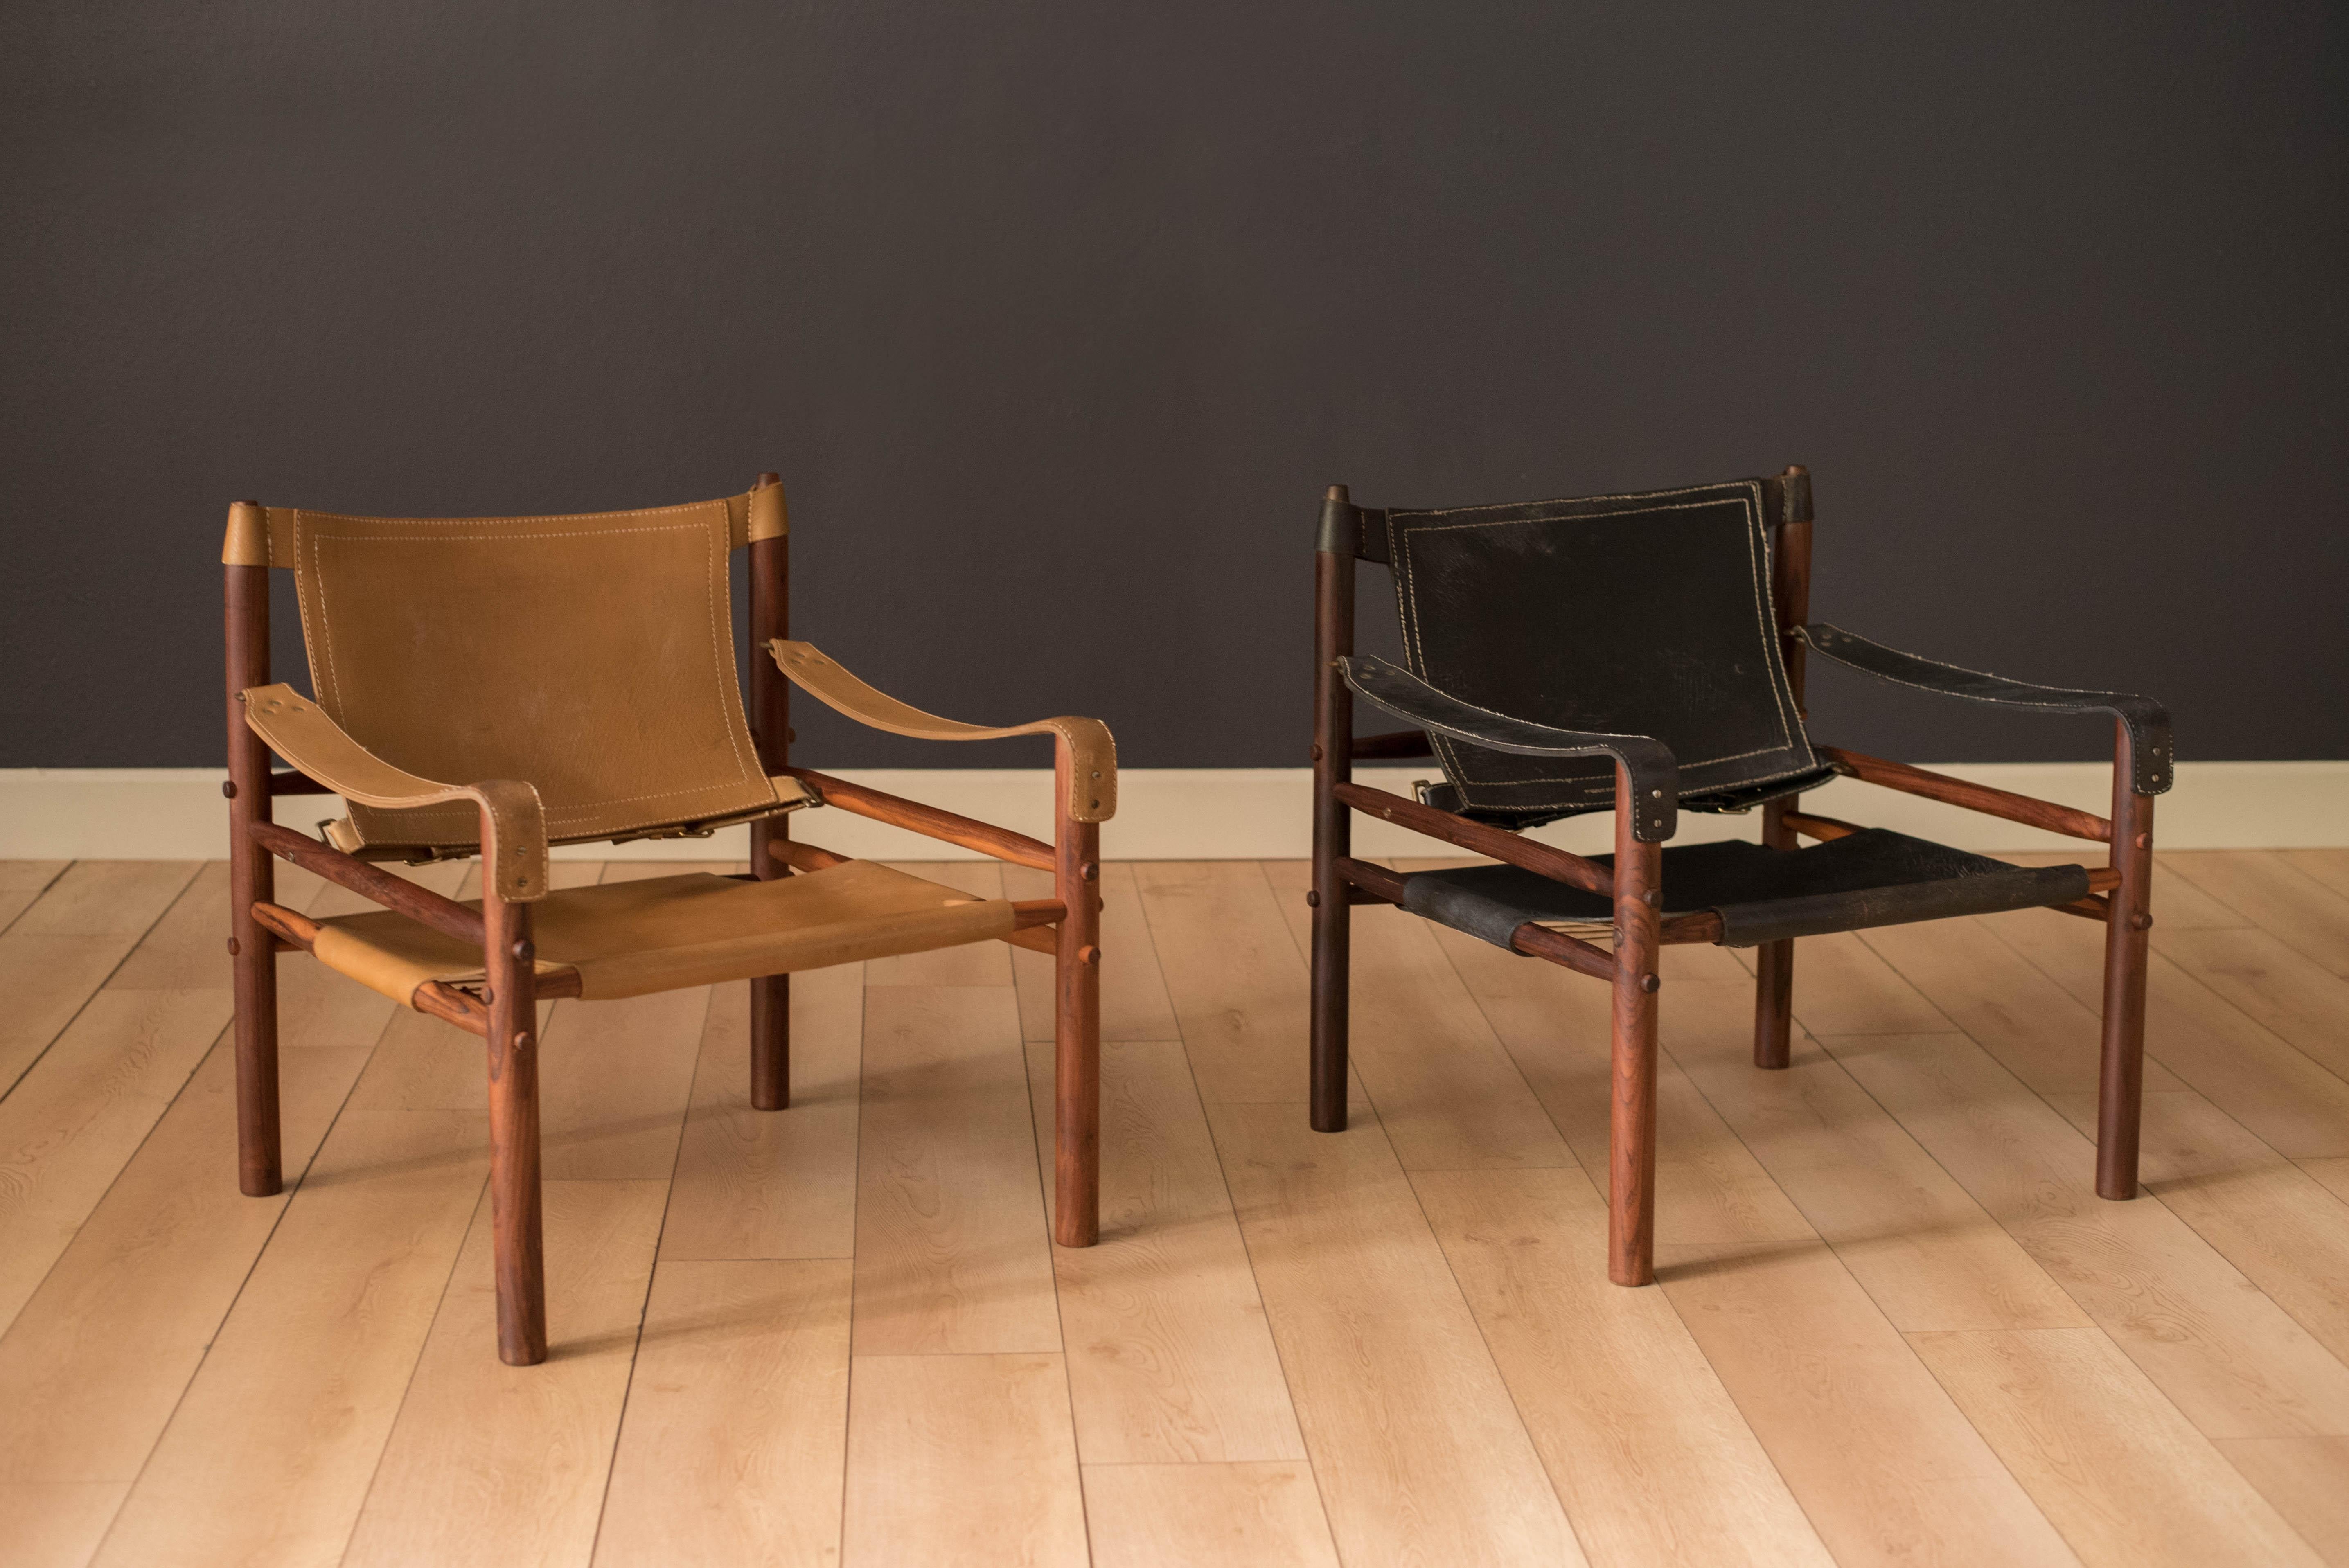 Vintage Sirocco Safari lounge chairs in rosewood designed by Arne Norell for Möbel AB, Sweden. Features the original handstitched slings in black and natural tan leather accented with brass hardware. Price is for each, please specify color.